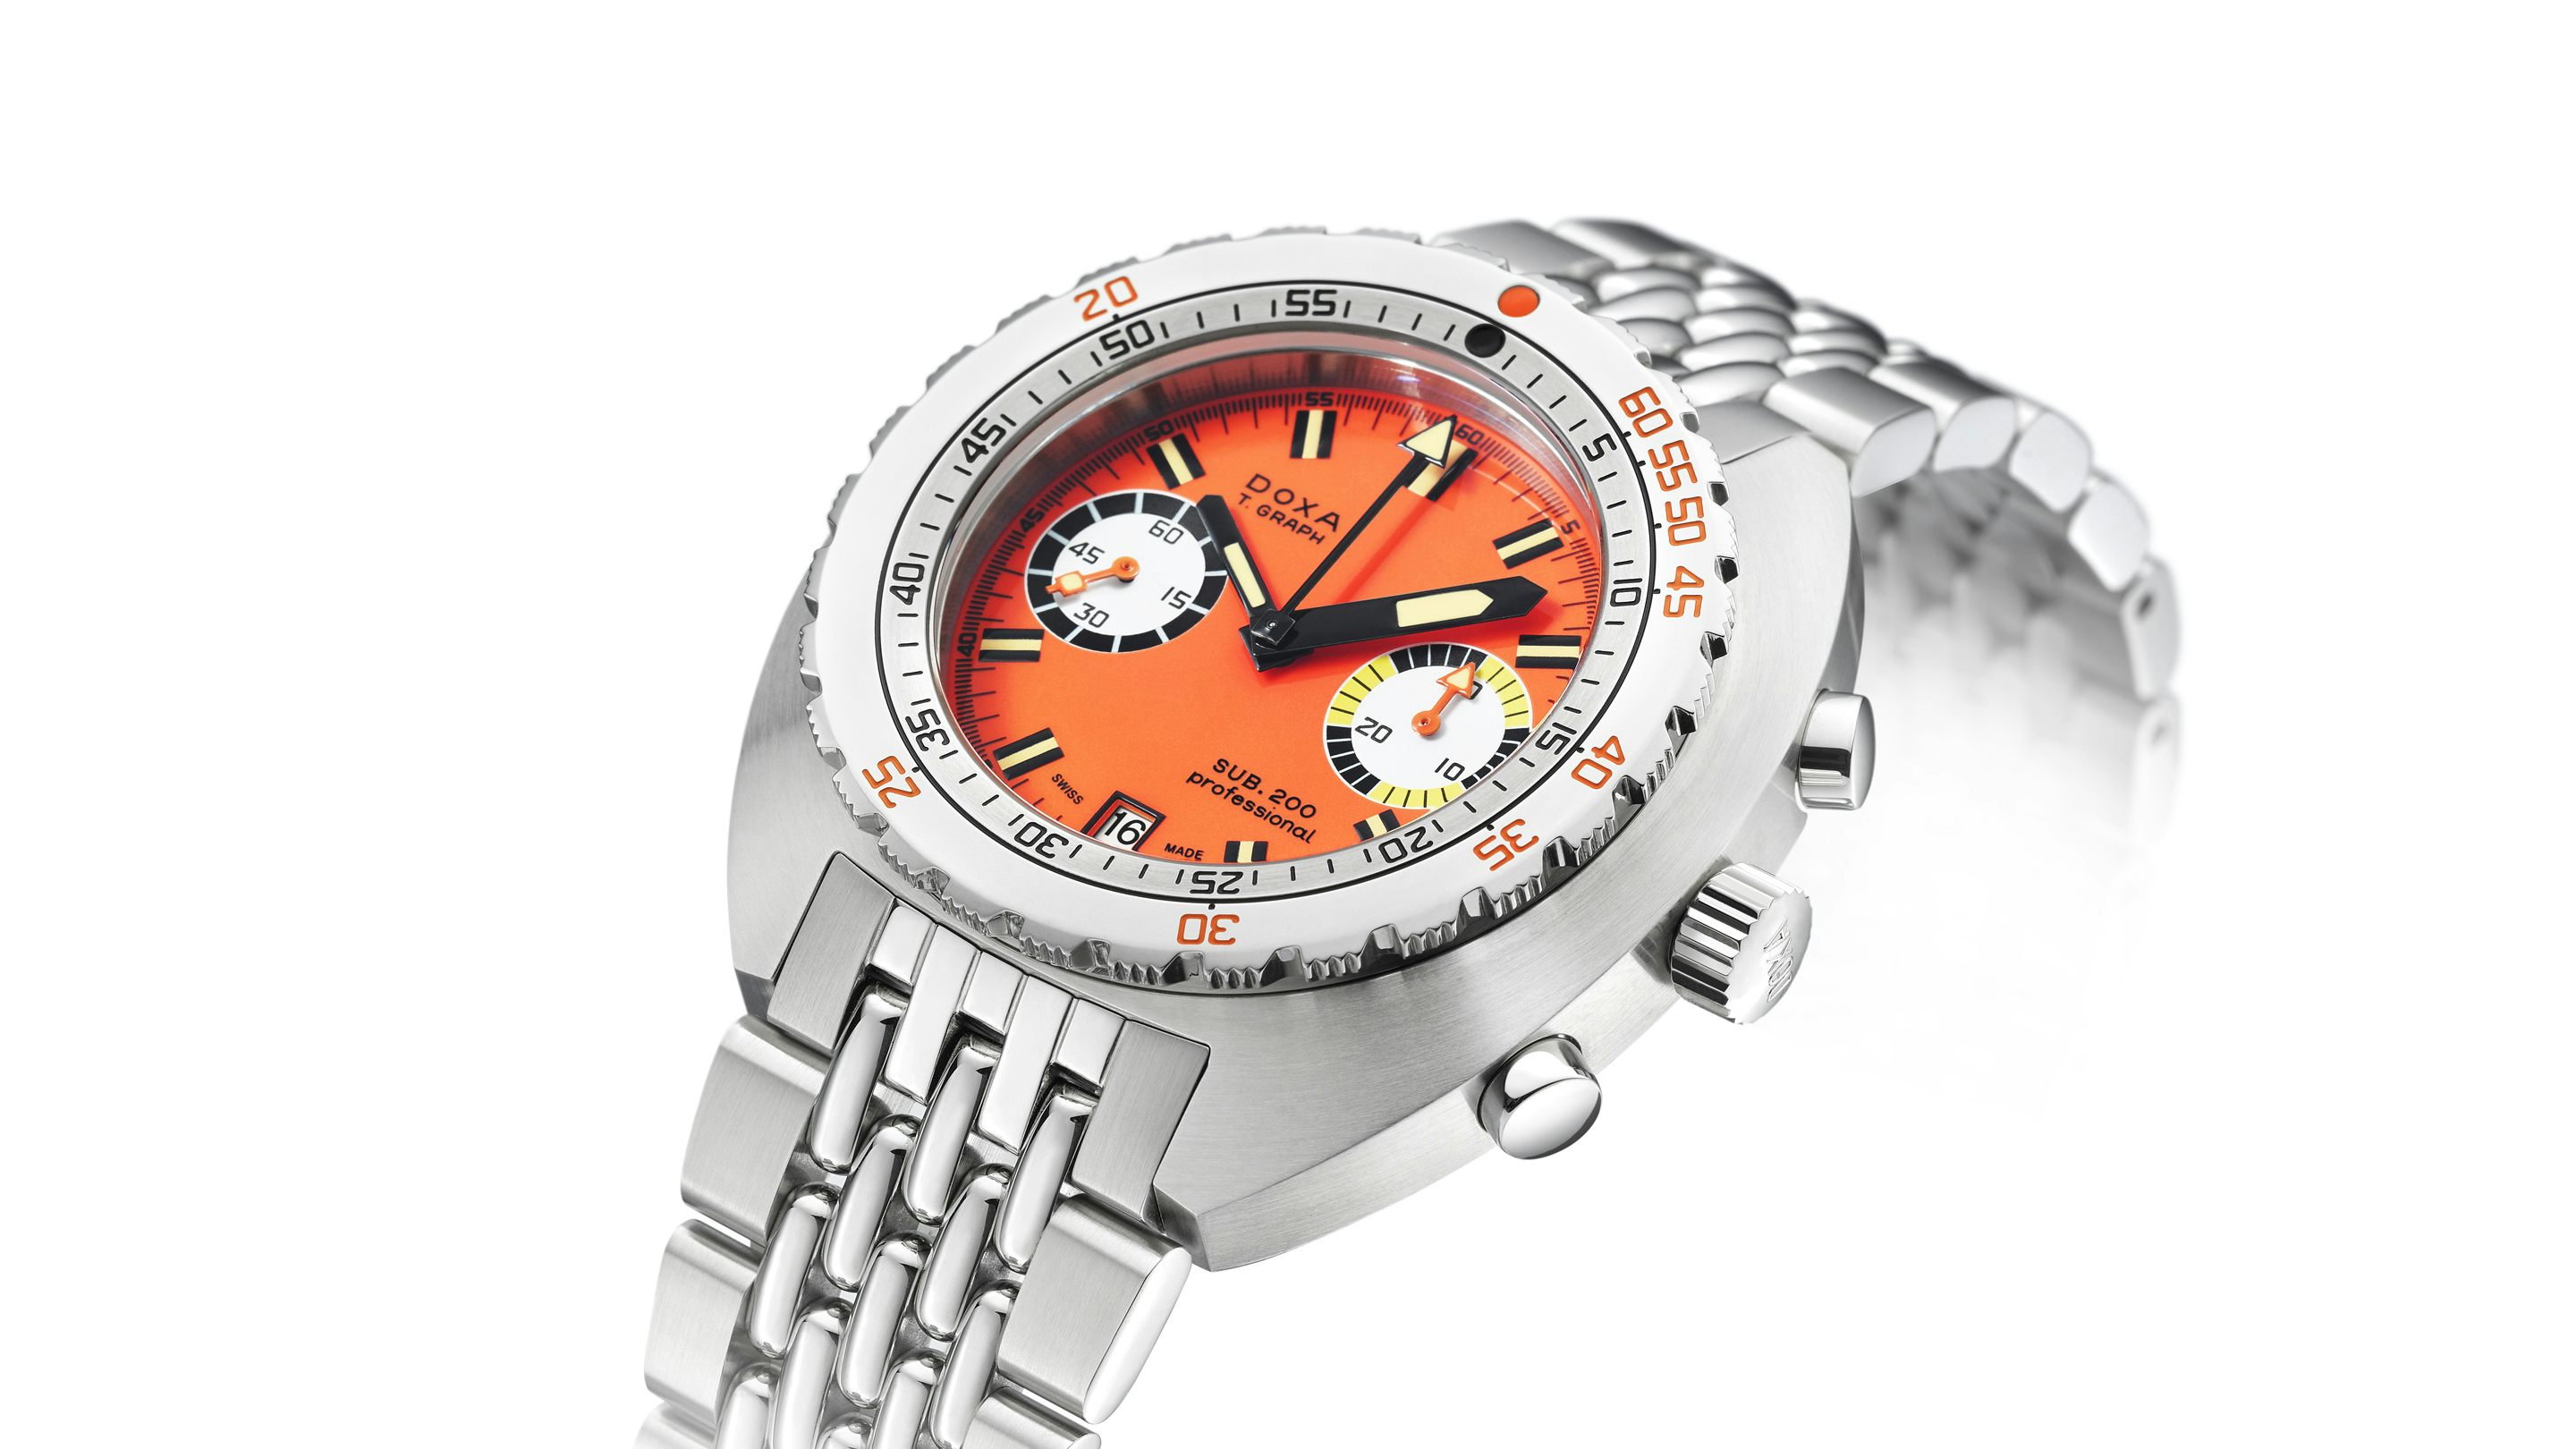 Introducing The Doxa Sub 200 T Graph Stainless Steel Hodinkee